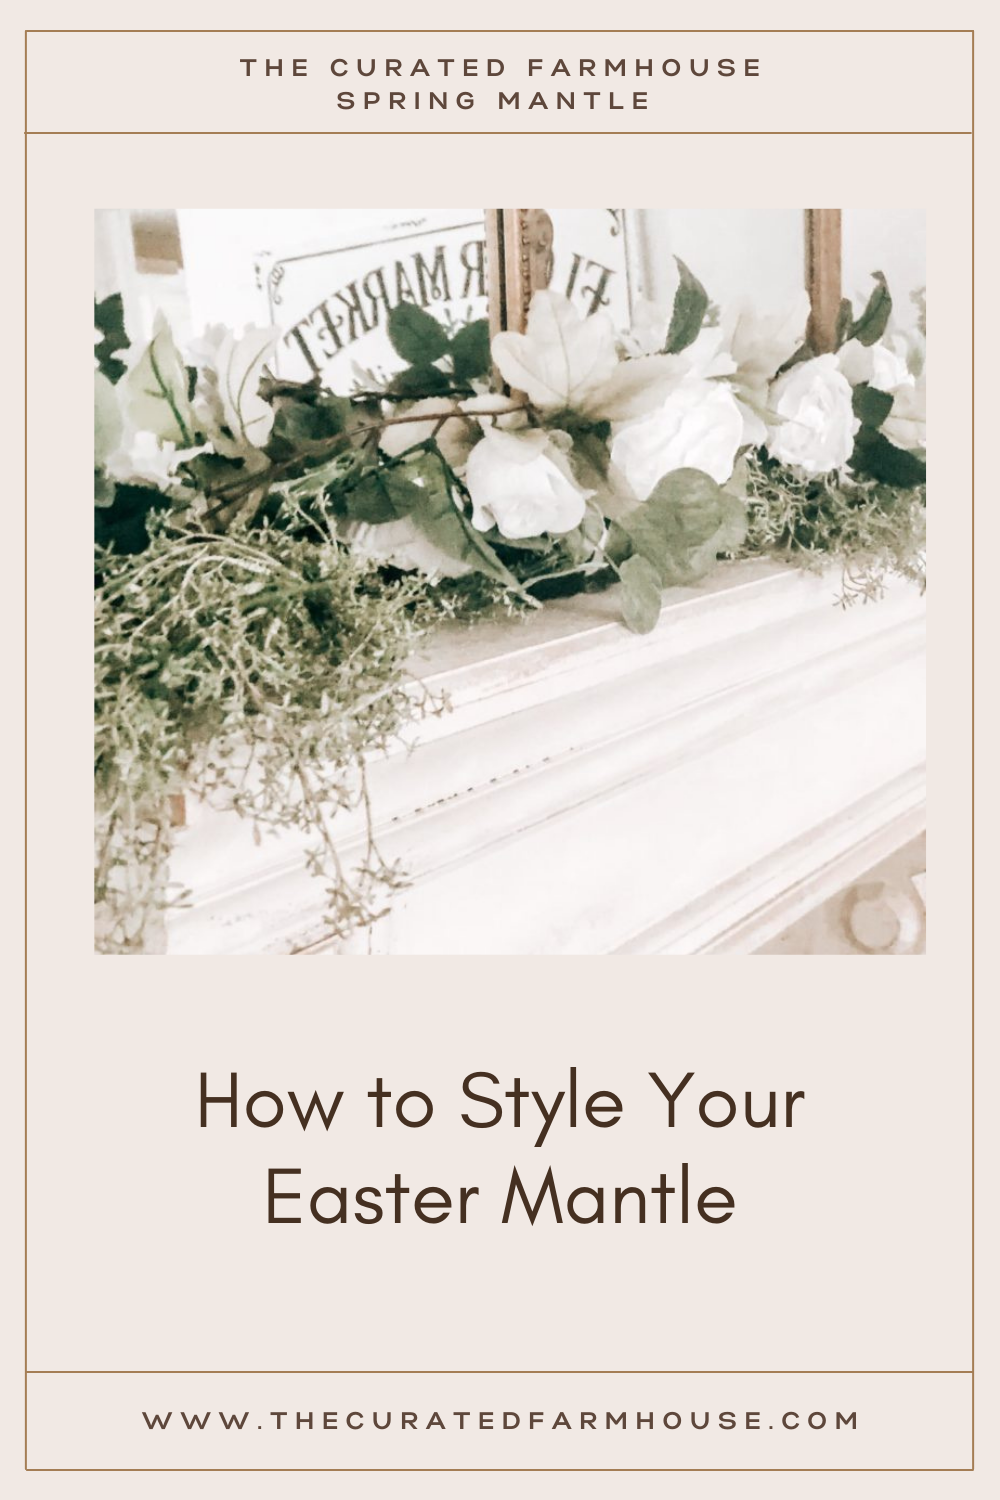 How to Style Your Easter Mantle